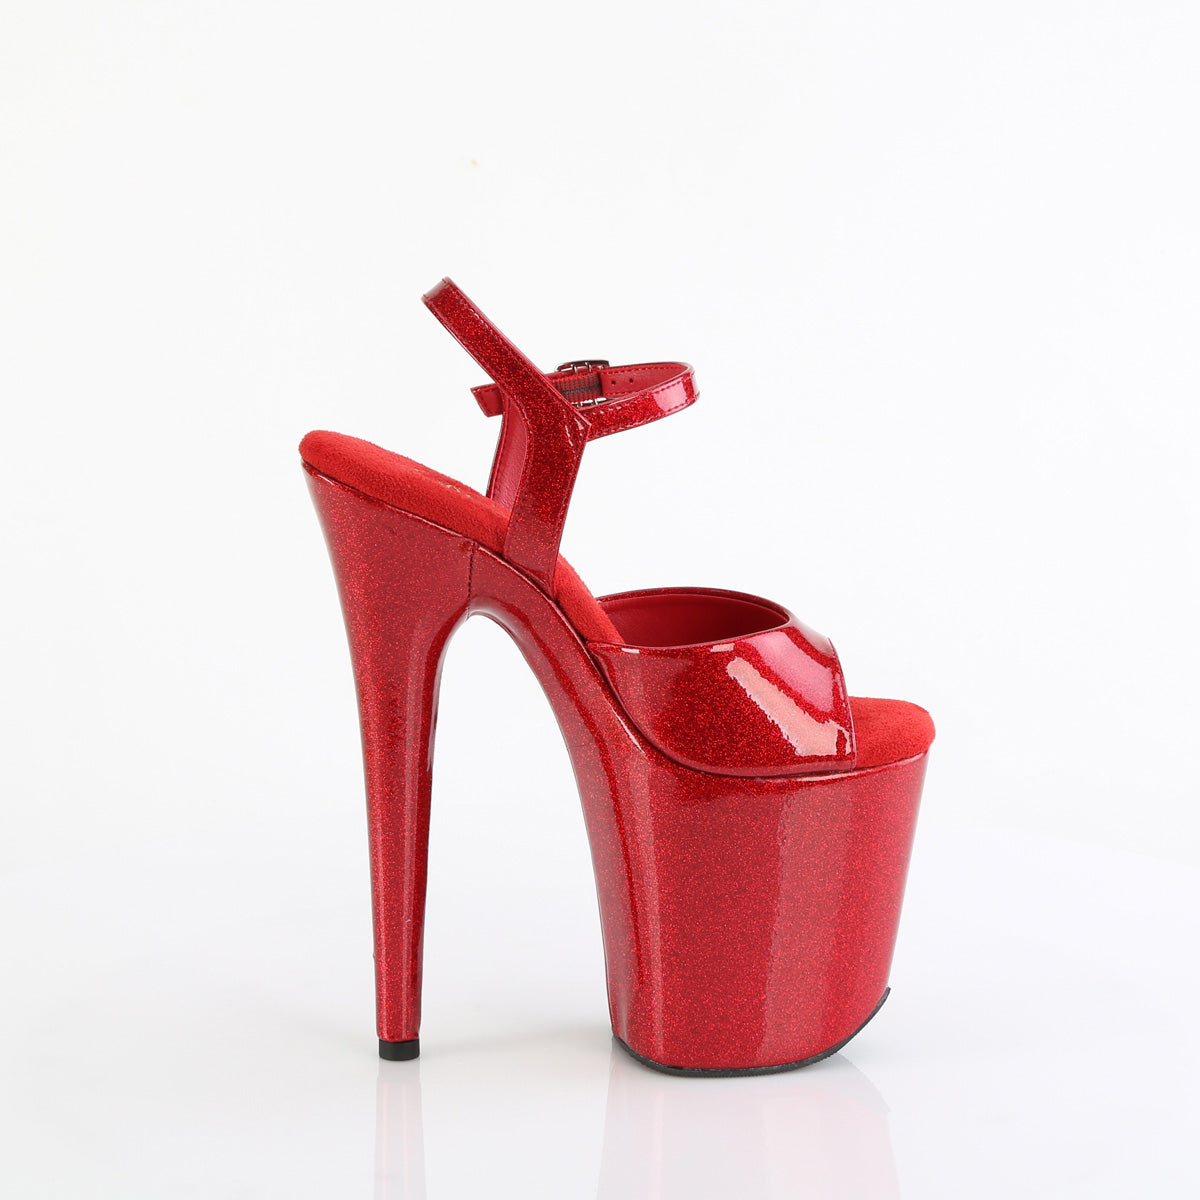 FLAMINGO-809GP Pleaser Ruby Red Glitter Patent Platform Shoes [Exotic Dancing Shoes]